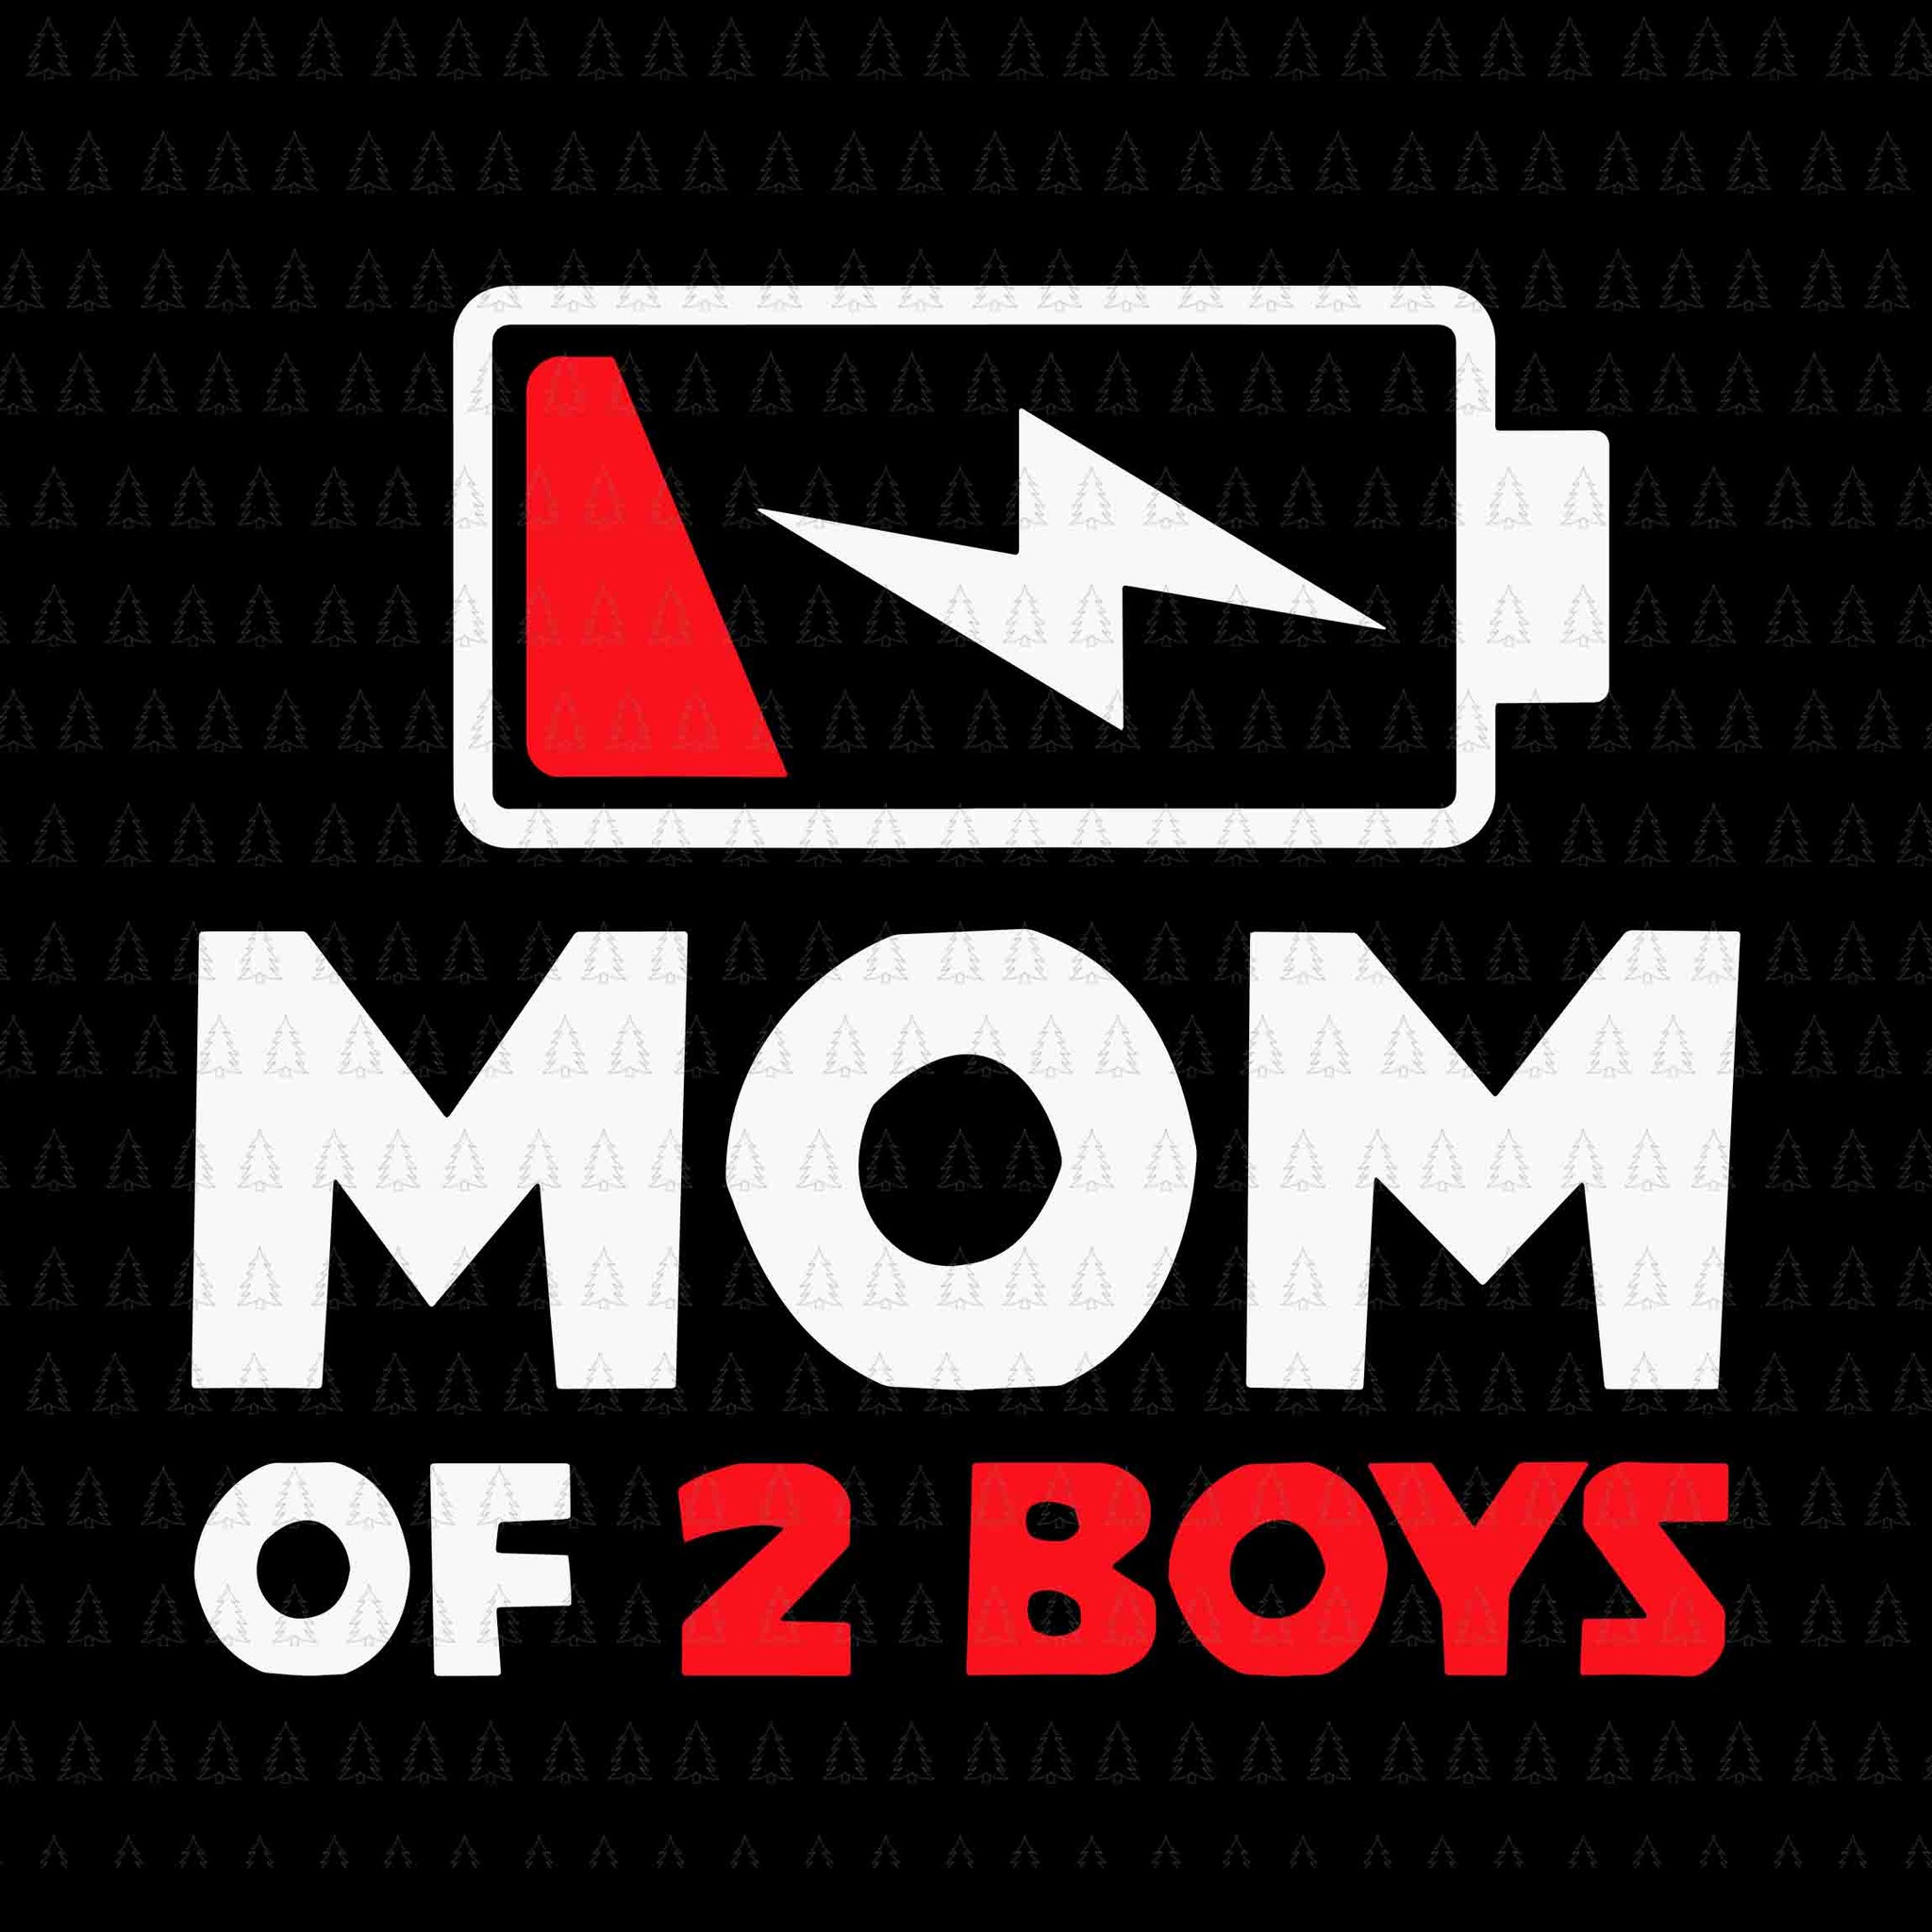 Mom of Two Boys Svg, Mother of Two Boys Svg, Mom of 2 Boys Twin Mother Svg, Mother's Day Svg, Motther Svg, Mom Svg